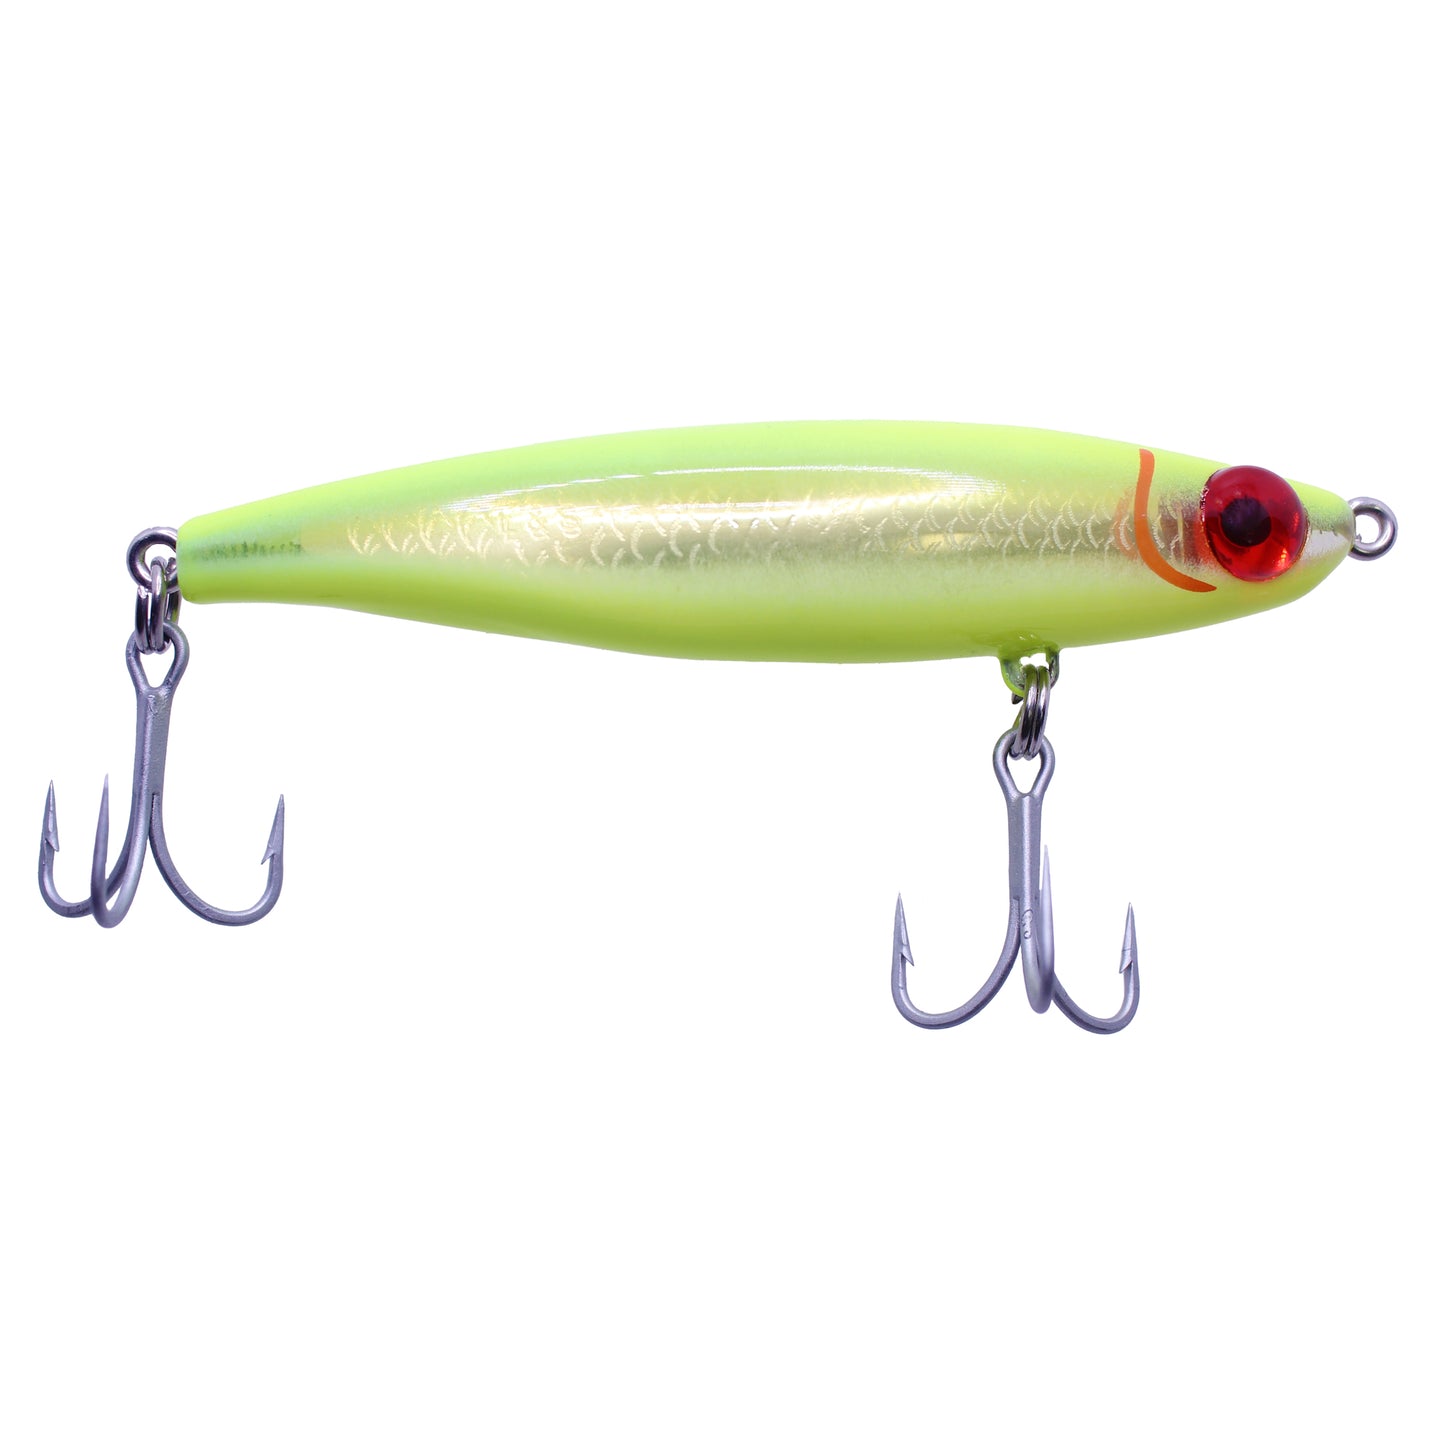 MirrOlure Catch 2000 Black : PECHE SUD, Saltwater fishing tackles, jigging  lures, reels, rods